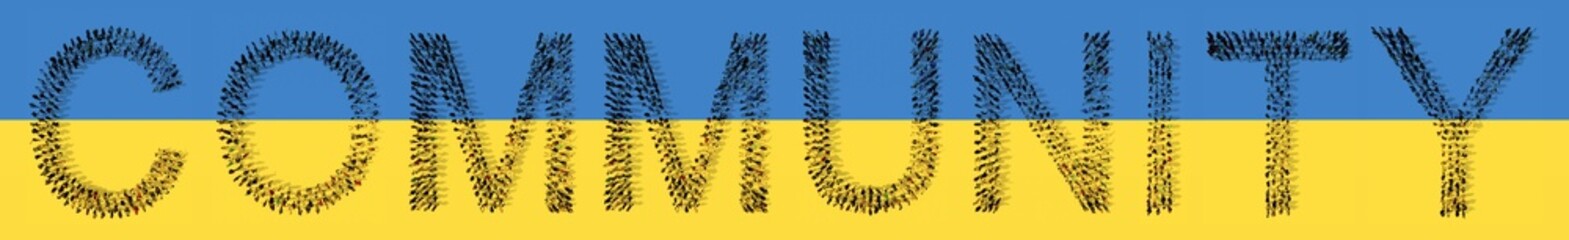 Concept or conceptual community of people forming  COMMUNITY word on Ukrainian flag. 3d illustration metaphor for patriotism, solidarity, international cooperation and support, friendship and help